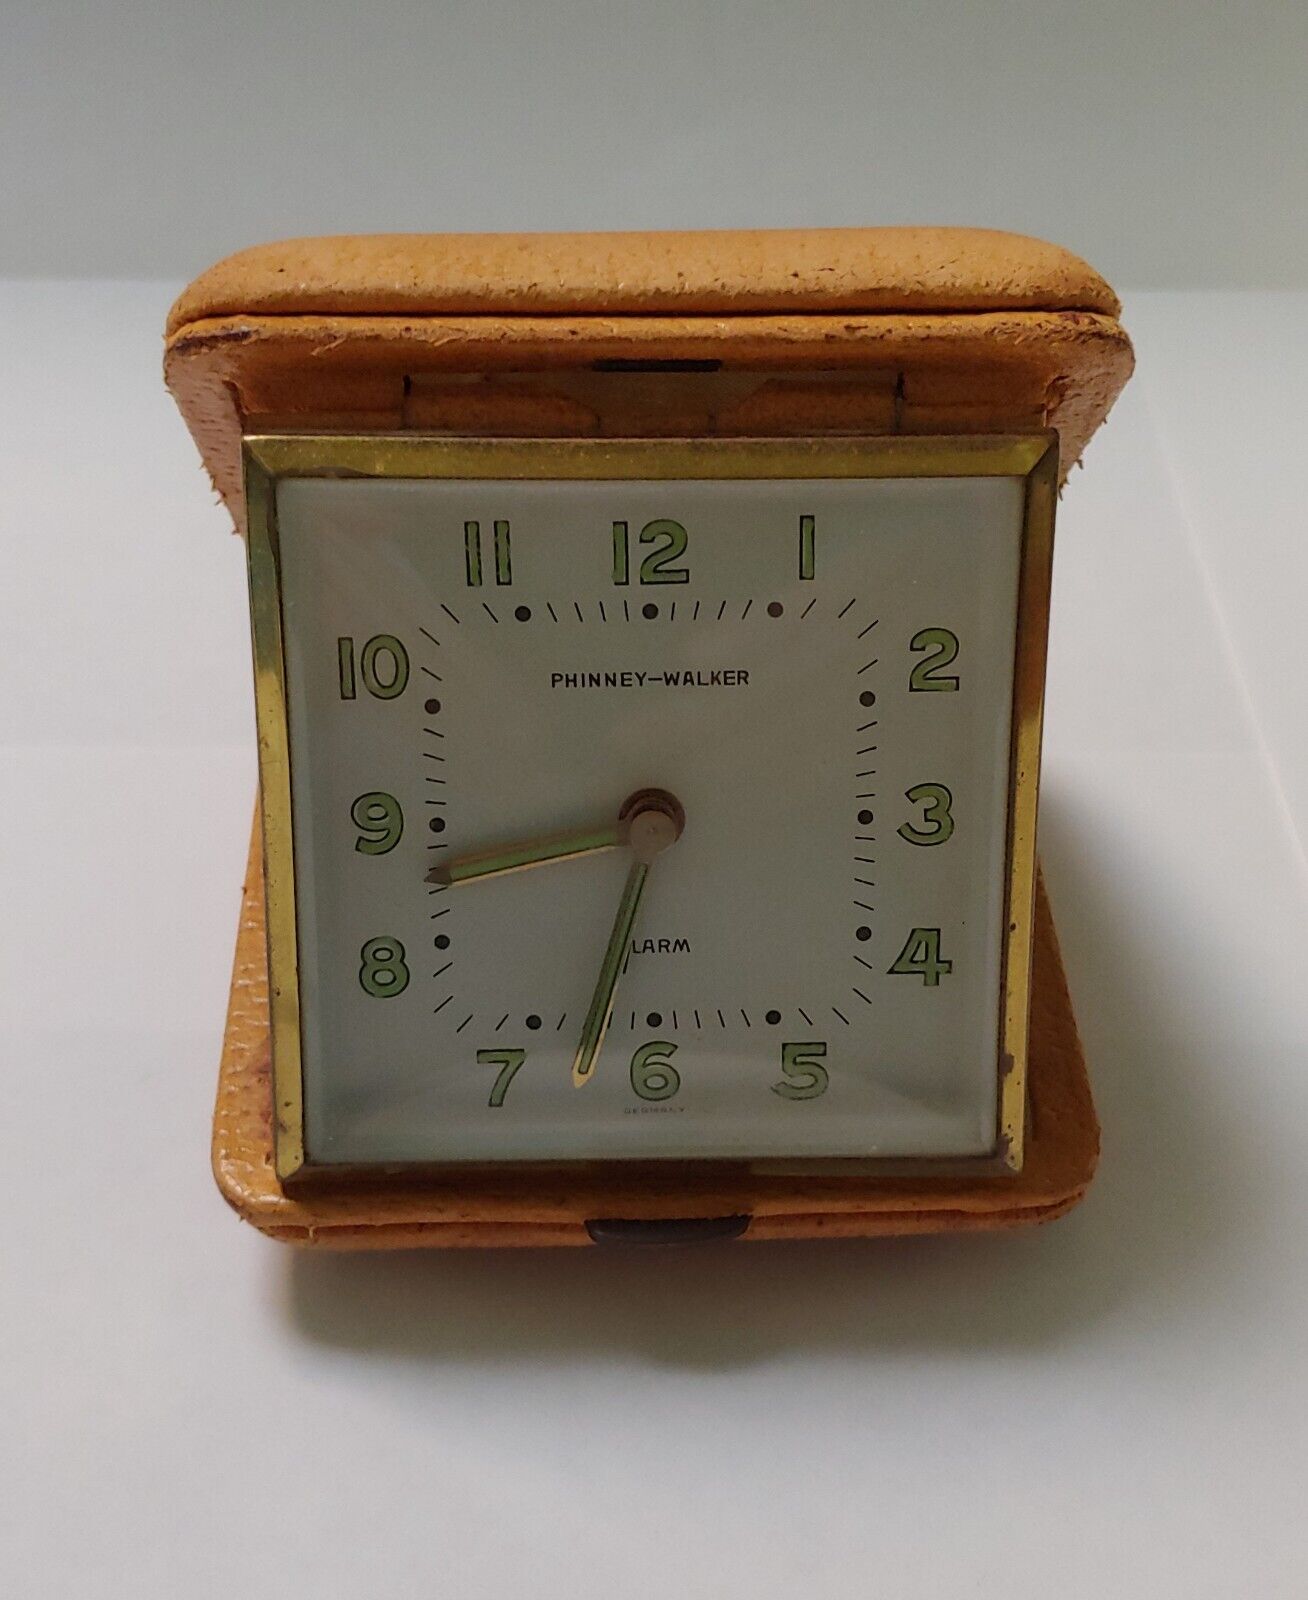 PRICE REDUCED on GERMAN MADE Phinney-Walker Travel Alarm Clock from the 1950s.